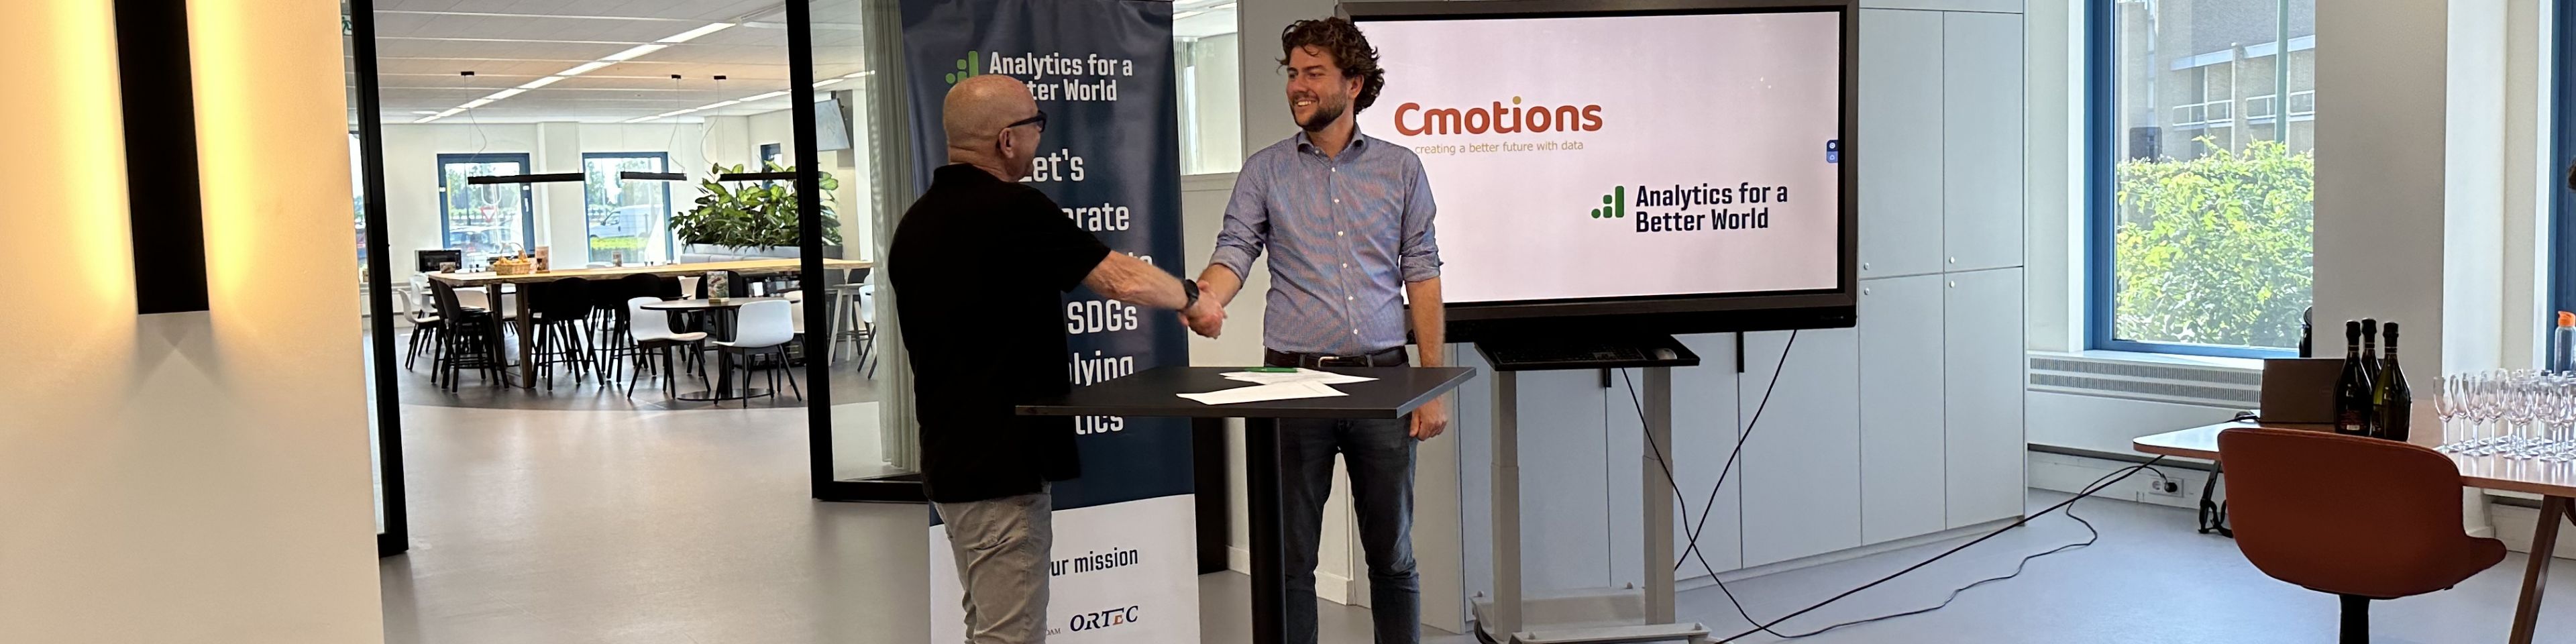 CMotions joins Analytics for a Better World!